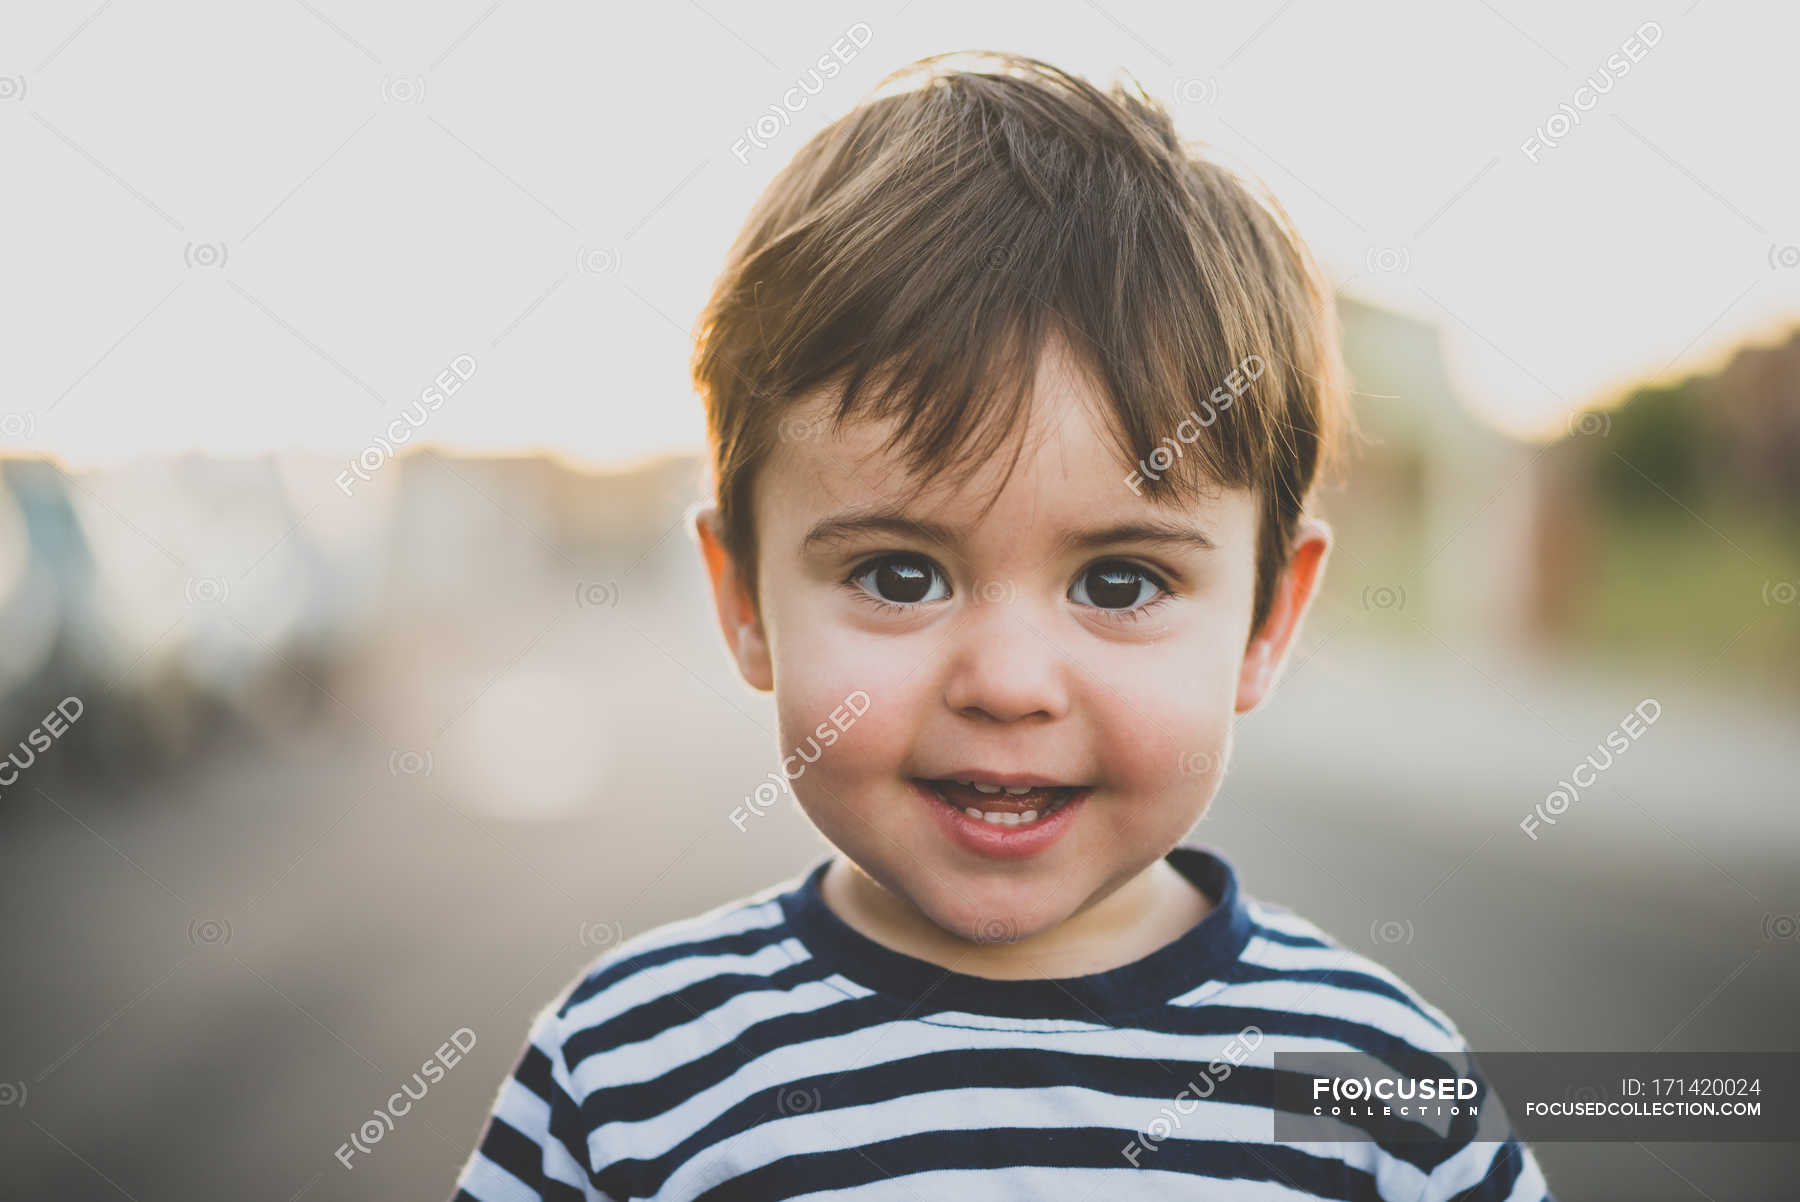 Portrait of lovely little boy with brown eyes and hair looking at camera  with smile. — happiness, stripe - Stock Photo | #171420024